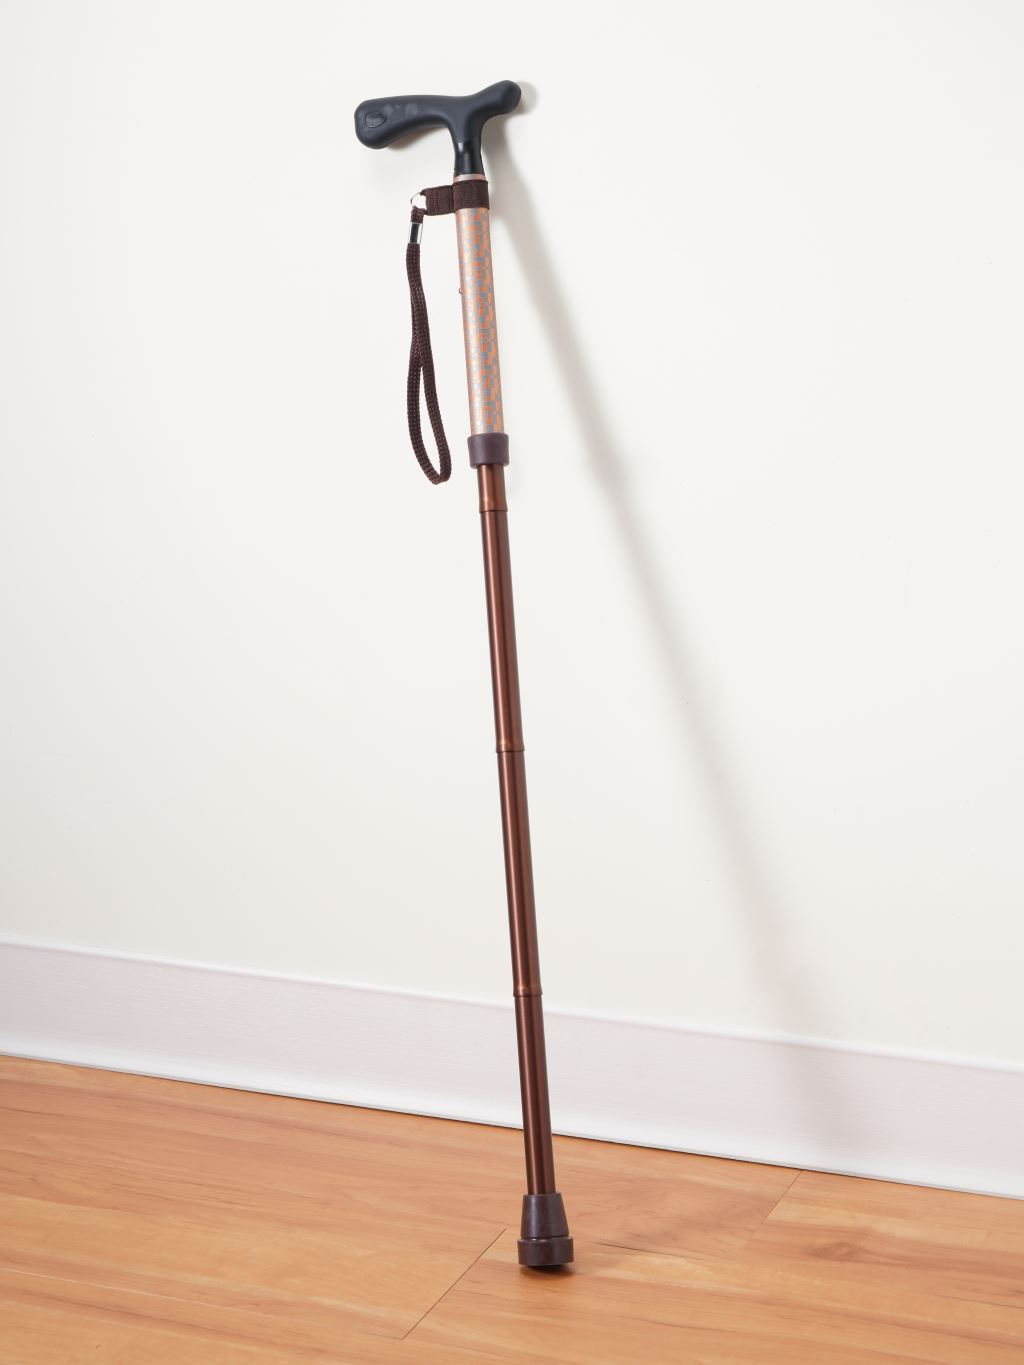 Anti-slip treatment on the handle allows you to put the cane against the wall without it falling off